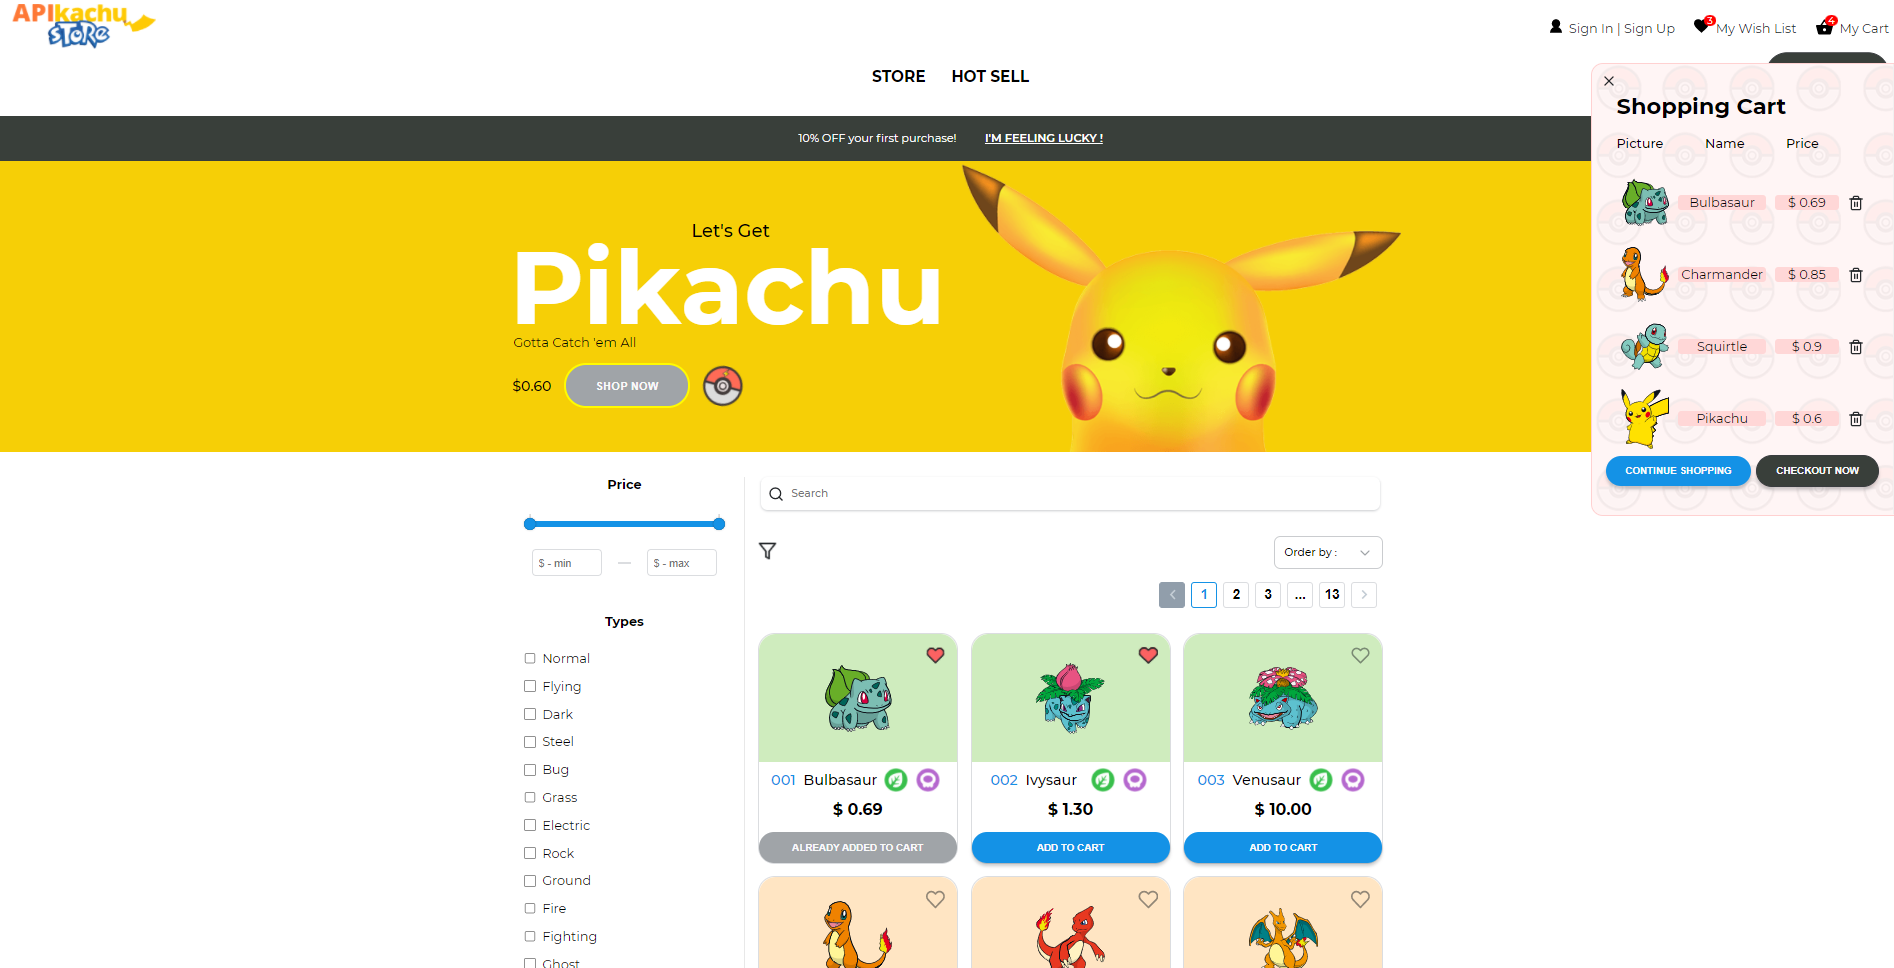 Preview del proyecto Apikachu